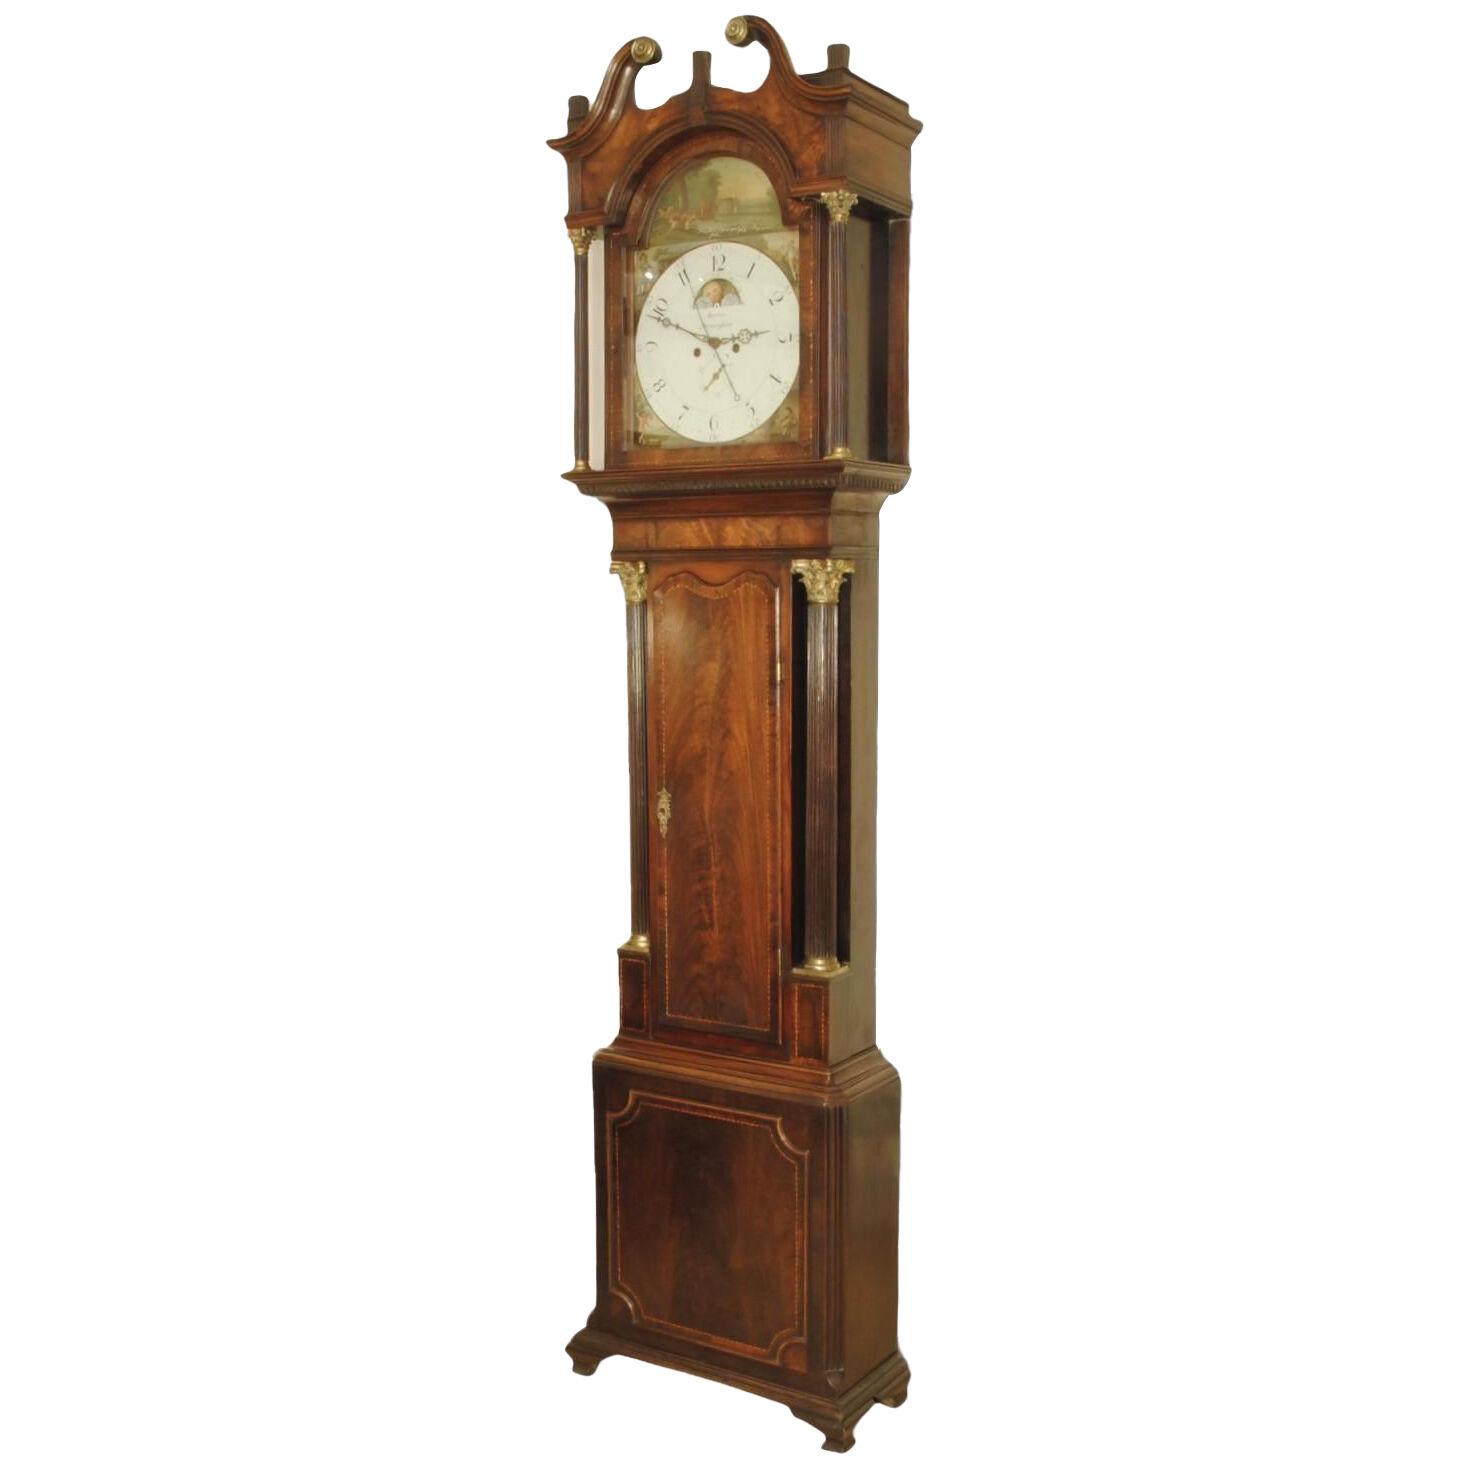 SUPERB 18TH CENTURY PAINTED DIAL MAHOGANY LONG CASE CLOCK